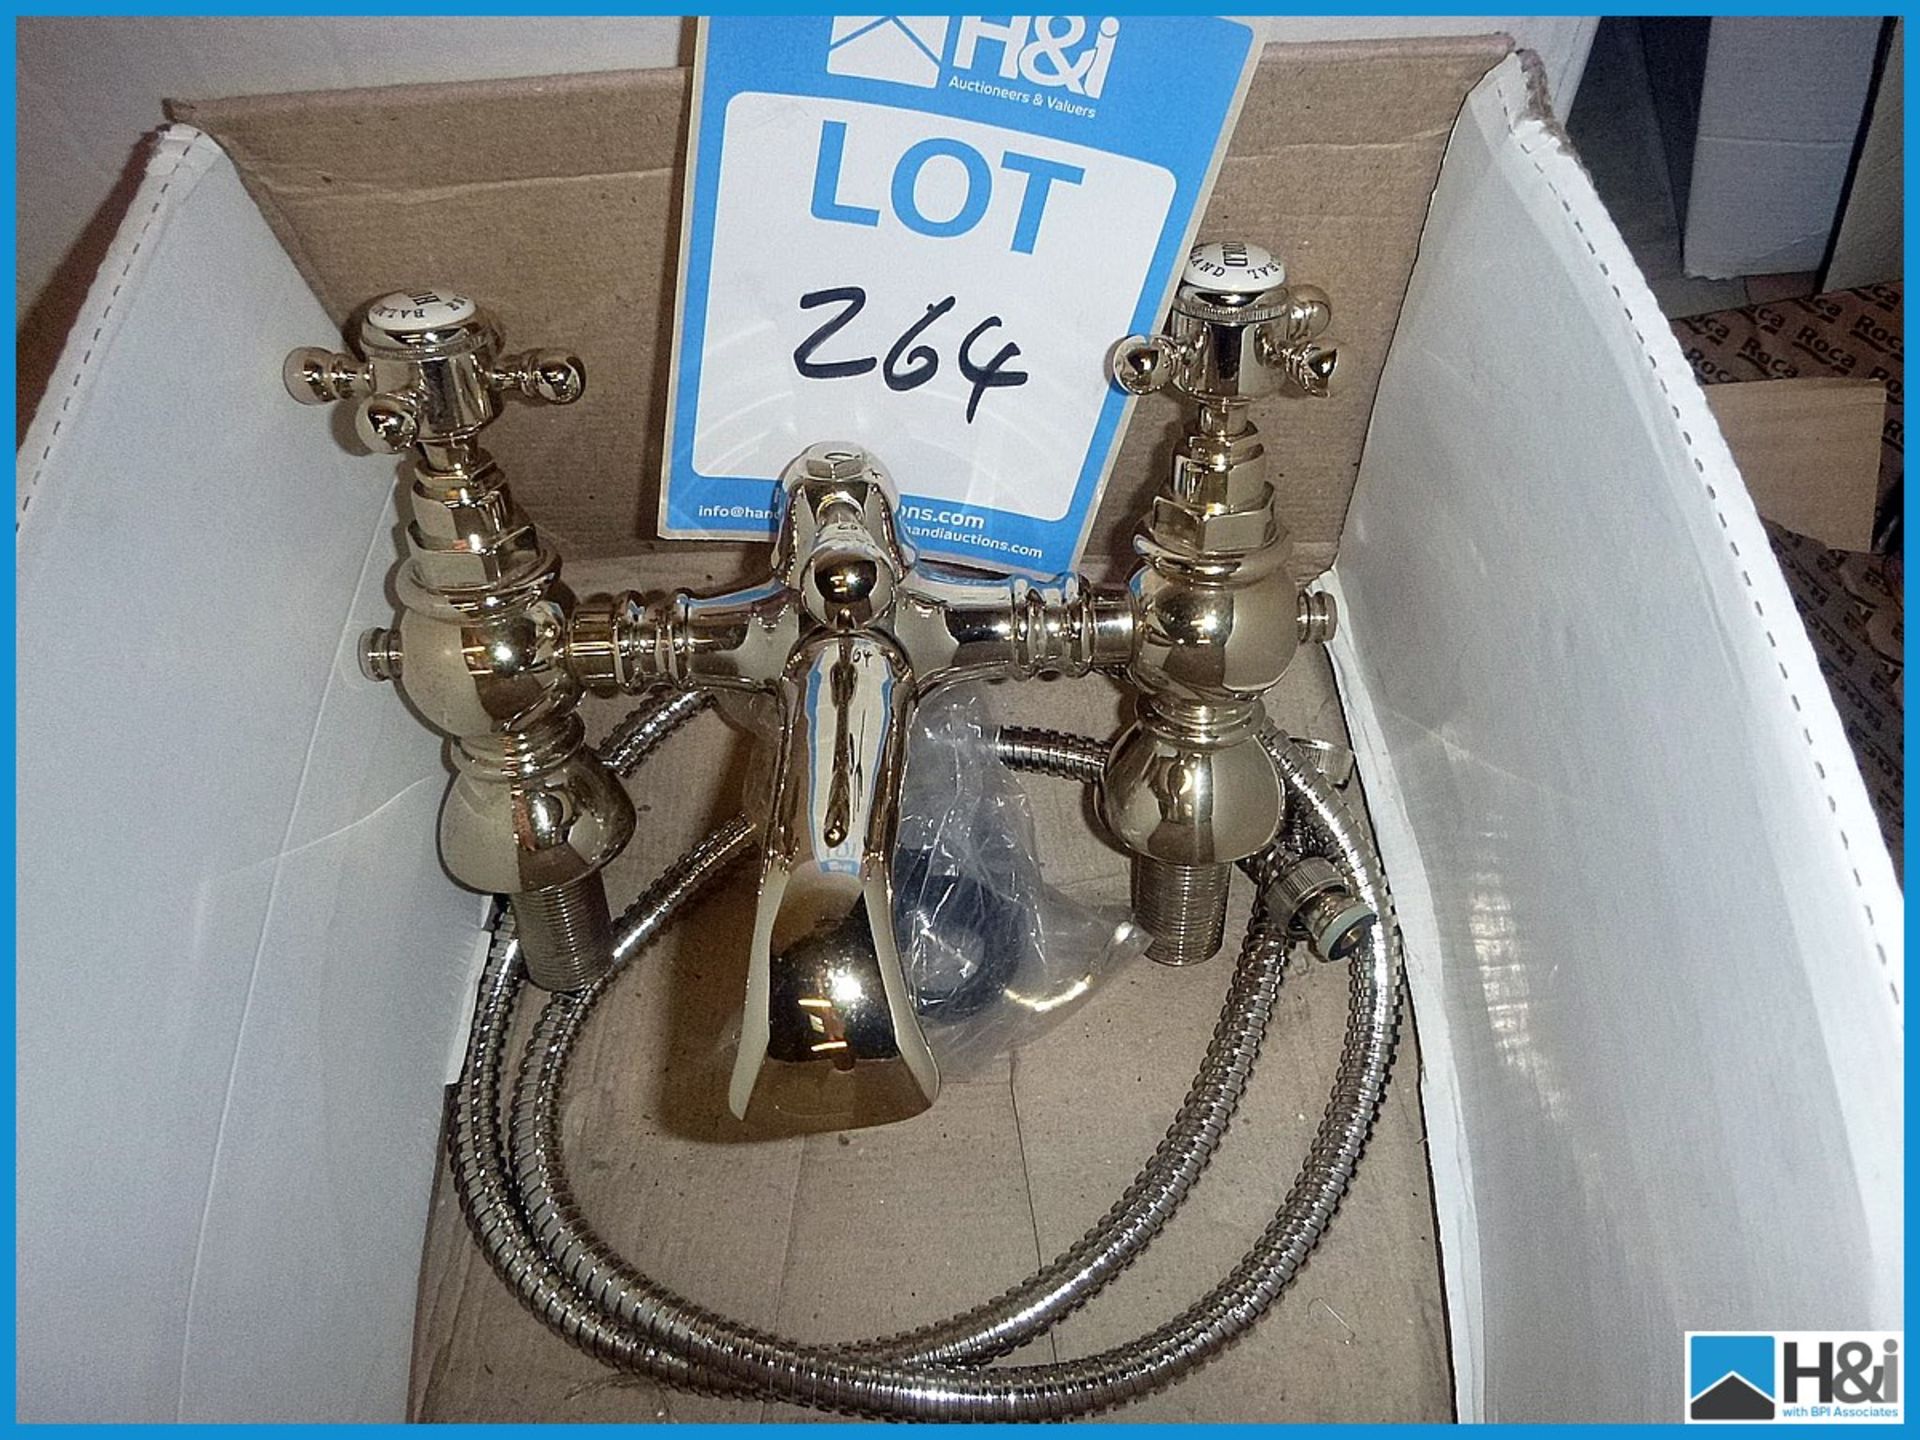 Heritage Bath/Shower Mixer (Incomplete)  Appraisal: Viewing Essential Serial No: NA Location: The